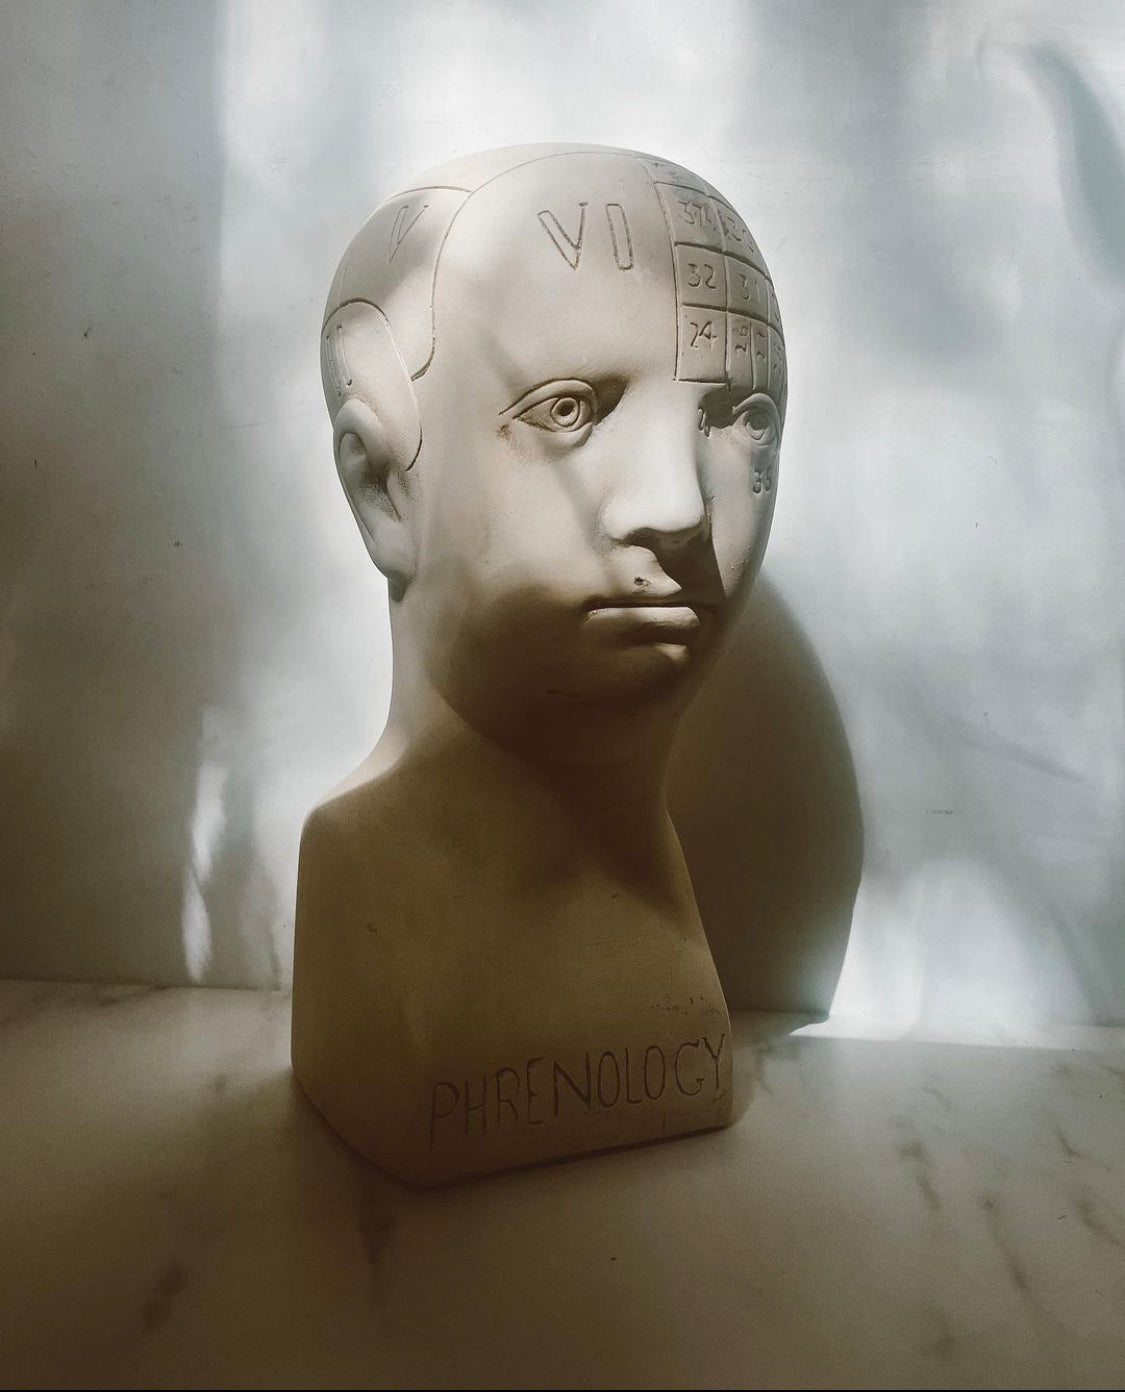 Phrenology Head Bust Replica, made to order by House Parts